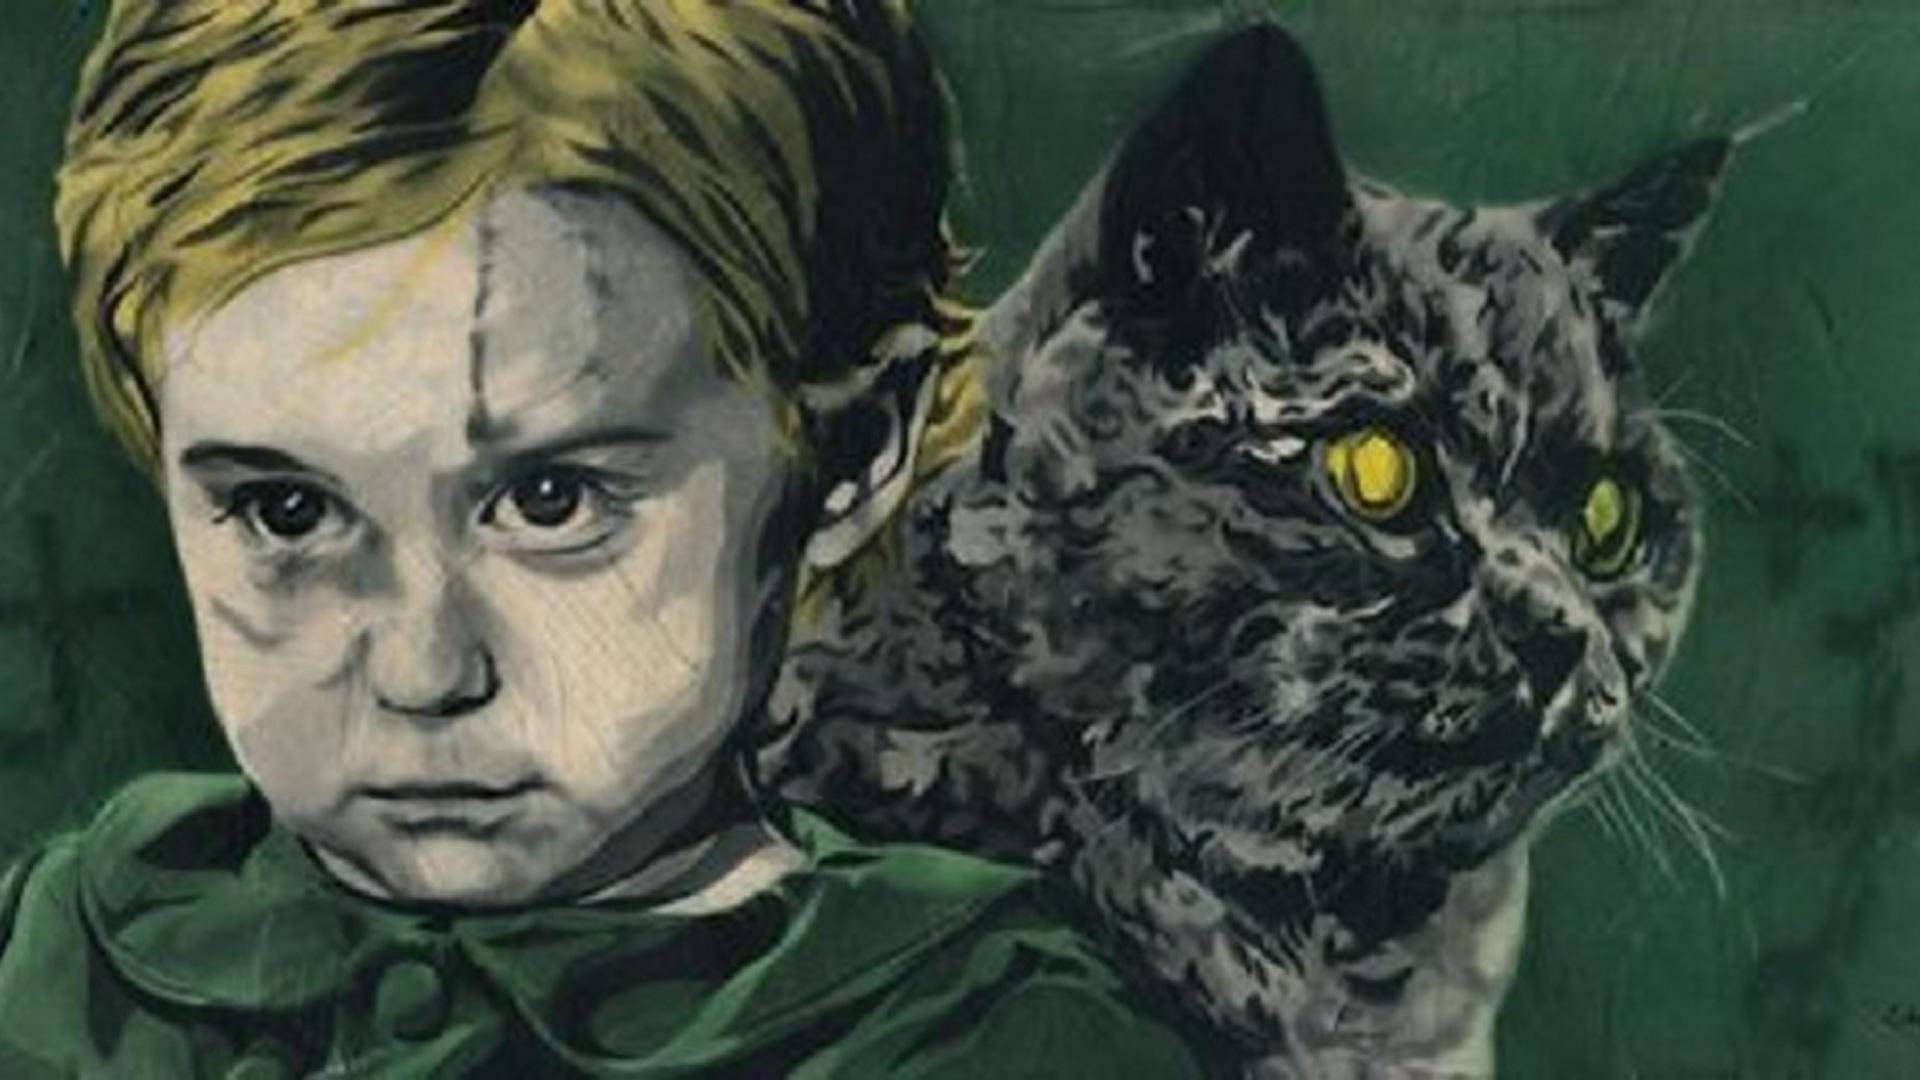 Pet Sematary (1989) by Bloody Date Night. The Atlantic Transmission